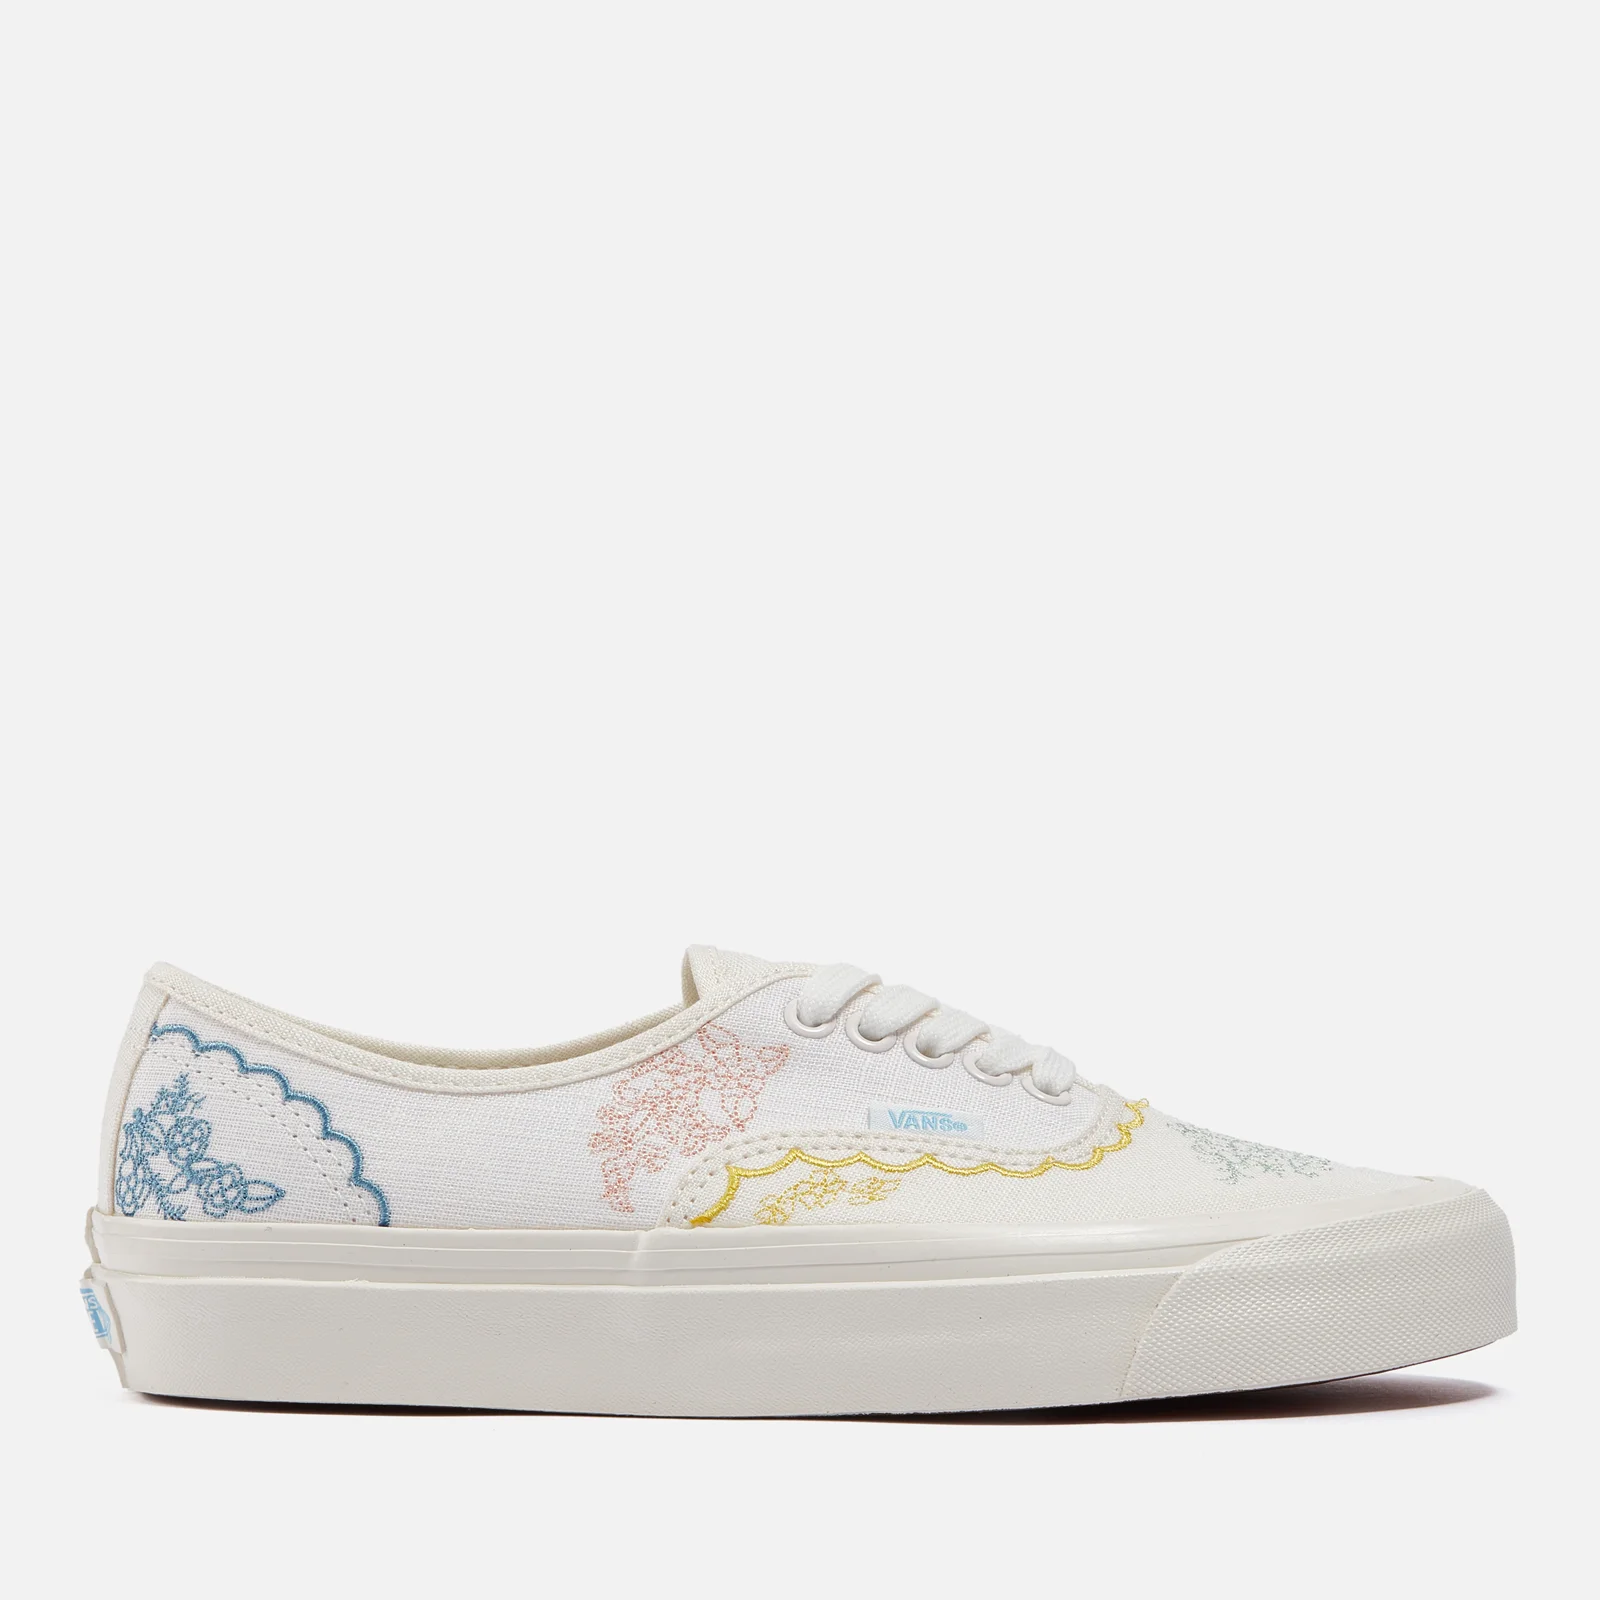 Vans Women's Blossom Authentic Floral-Embroidered Linen Trainers Image 1